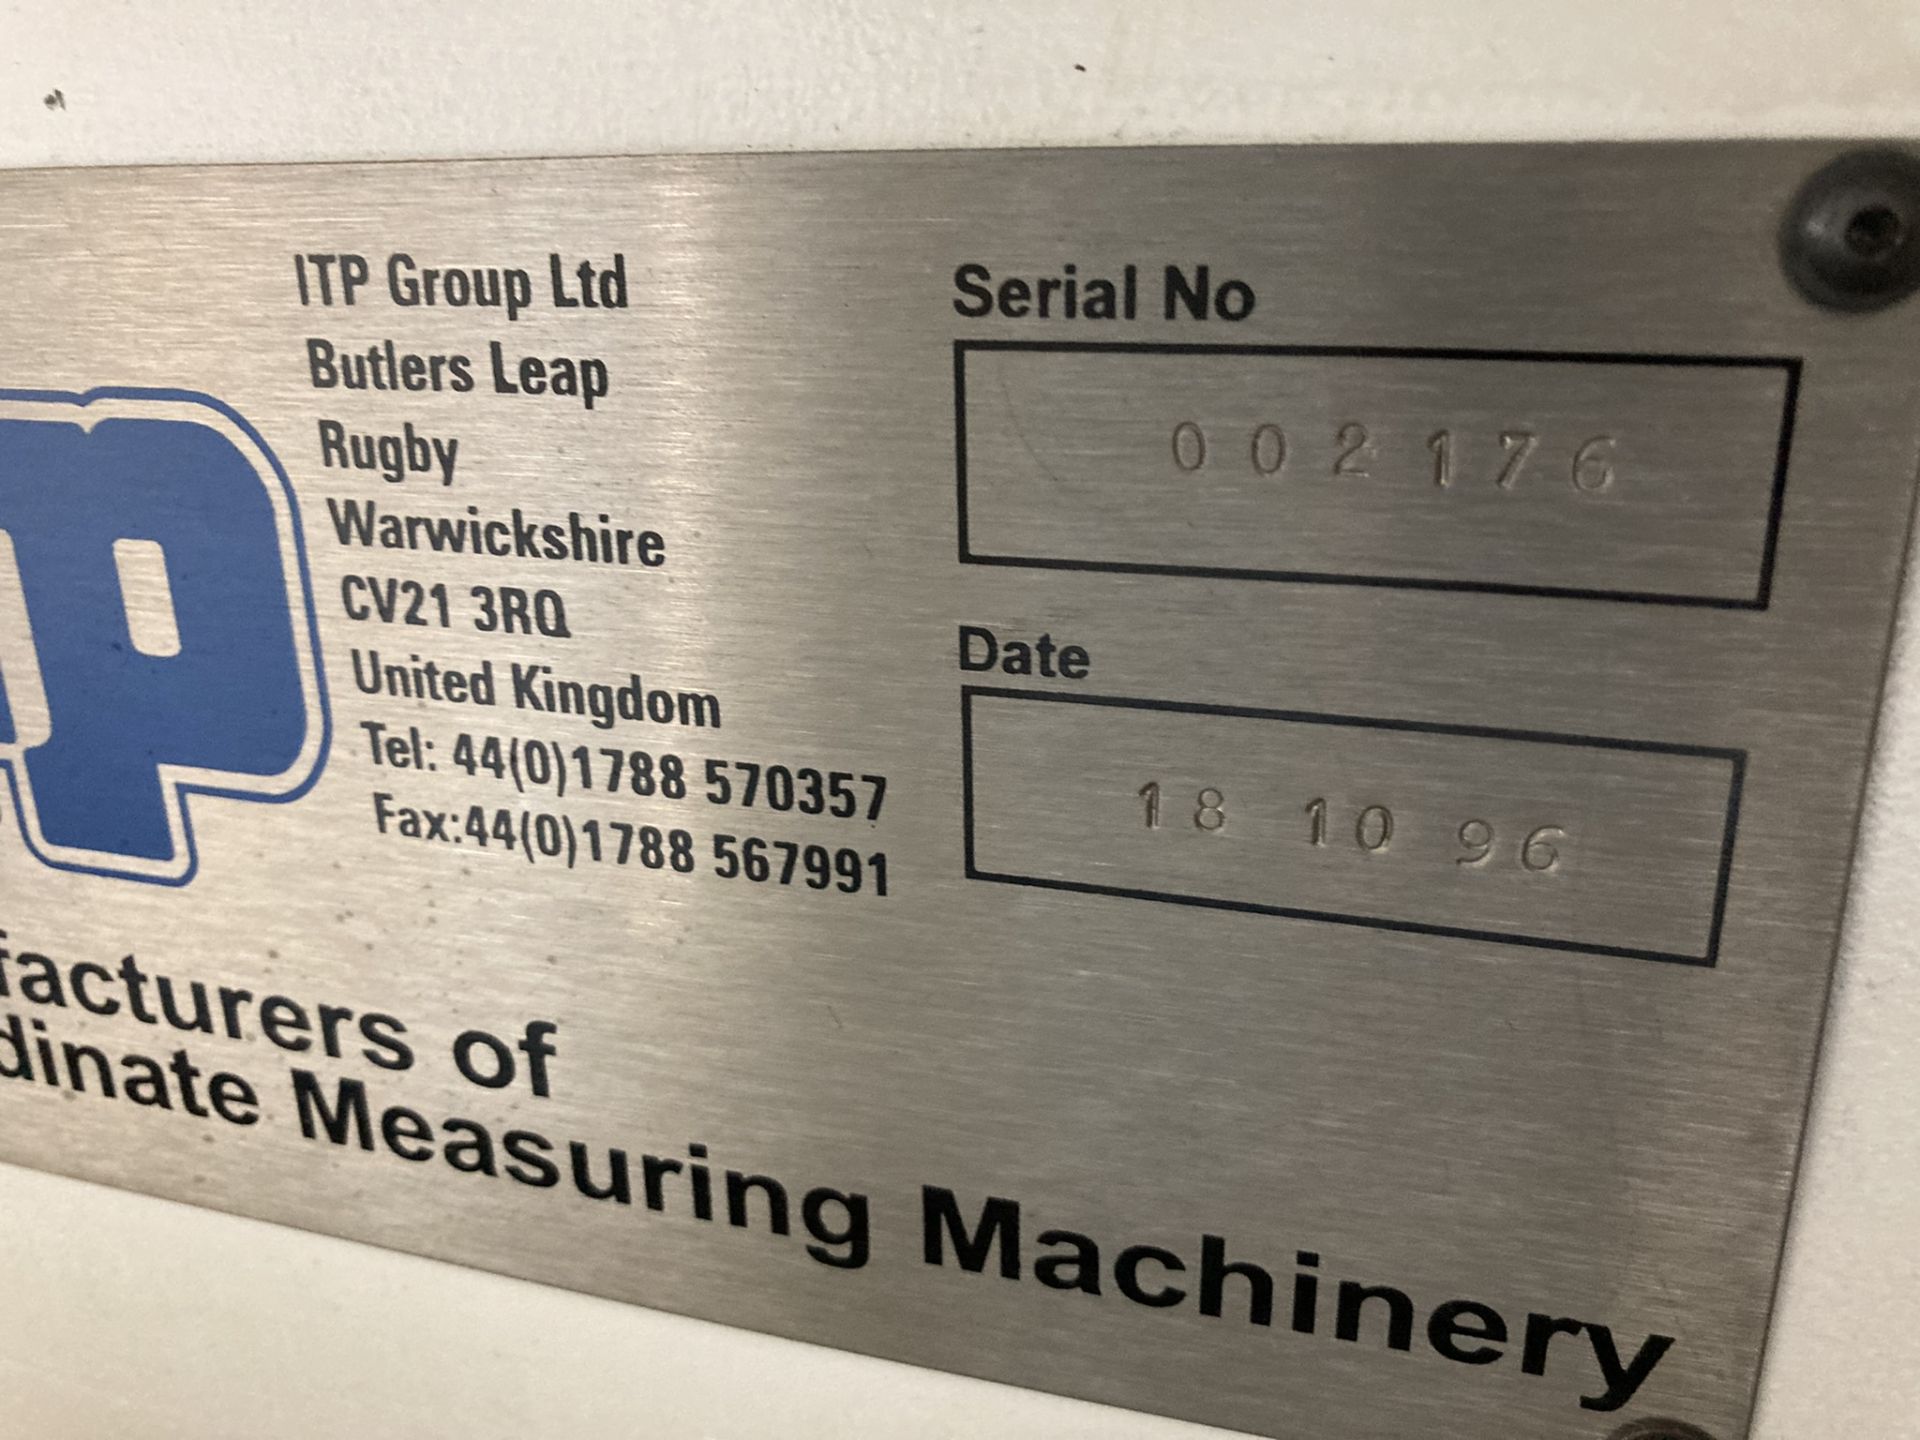 1 ITP Group, CMM approx. 1.8m x 0.Sm , Serial Number: 002176, Year of Manufacture: 1996 - Image 4 of 6